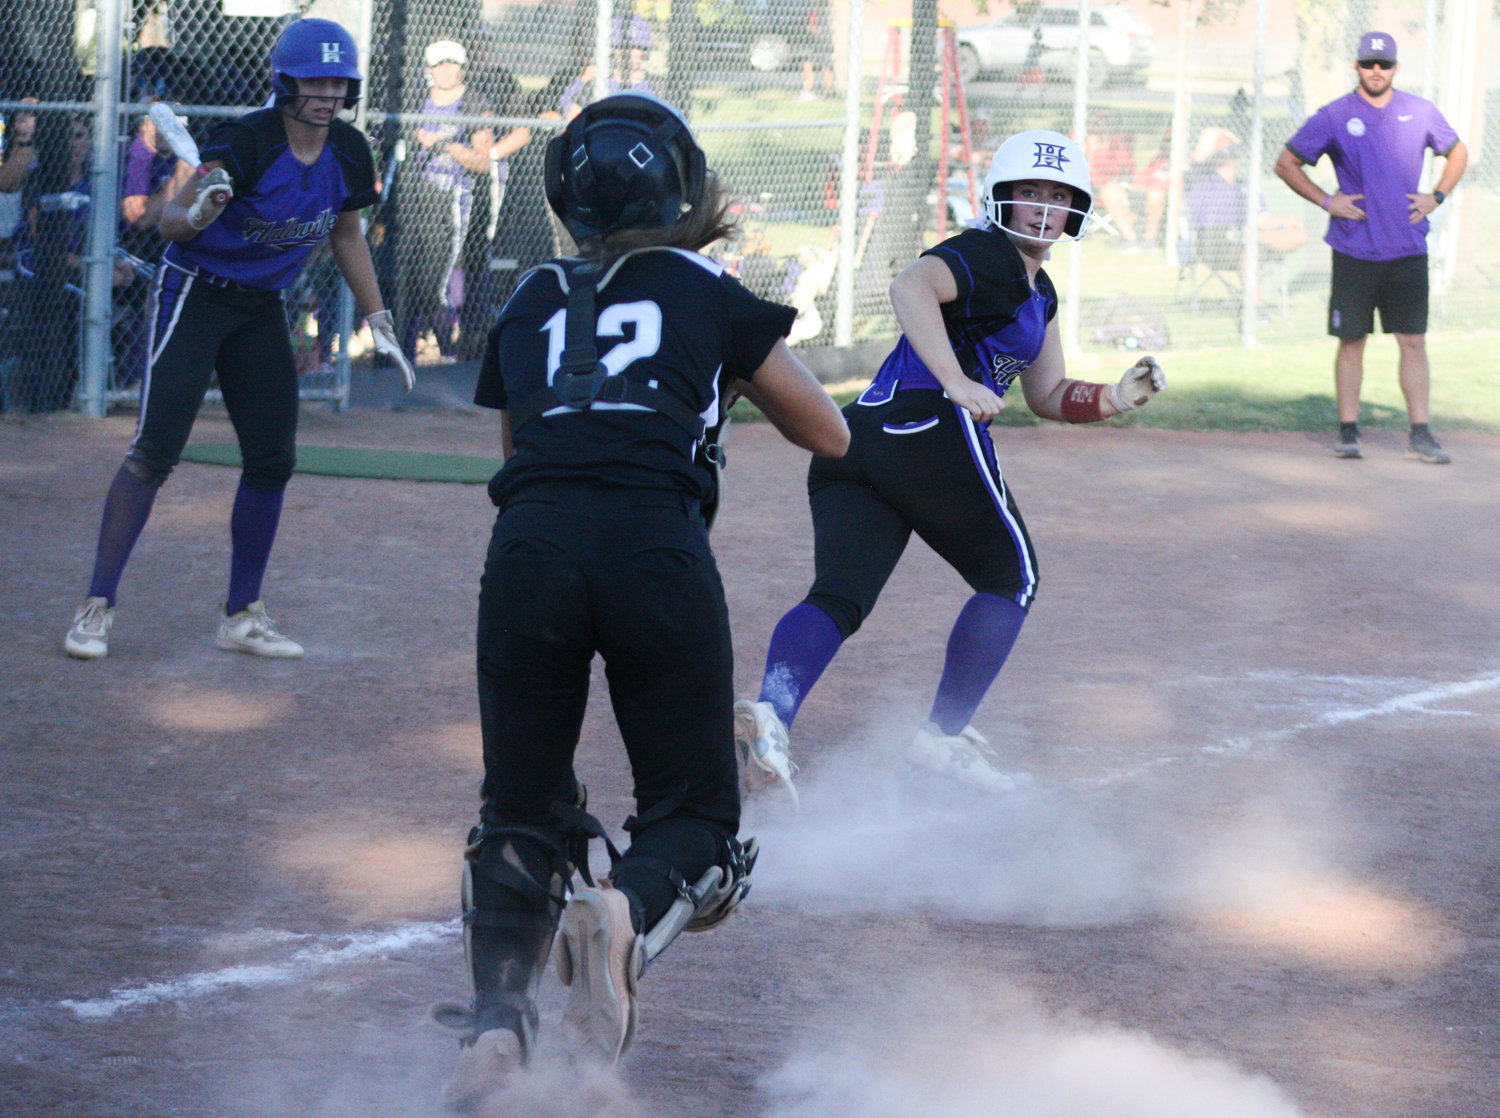 Centralia senior catcher Harper Sontheimer pursues a Hallsville player in a rundown between third base and home plate on Saturday in the team's 5-2 loss in six innings at the Centralia Softball Tournament at Nathan A. Toalson Bicentennial Park in Centralia